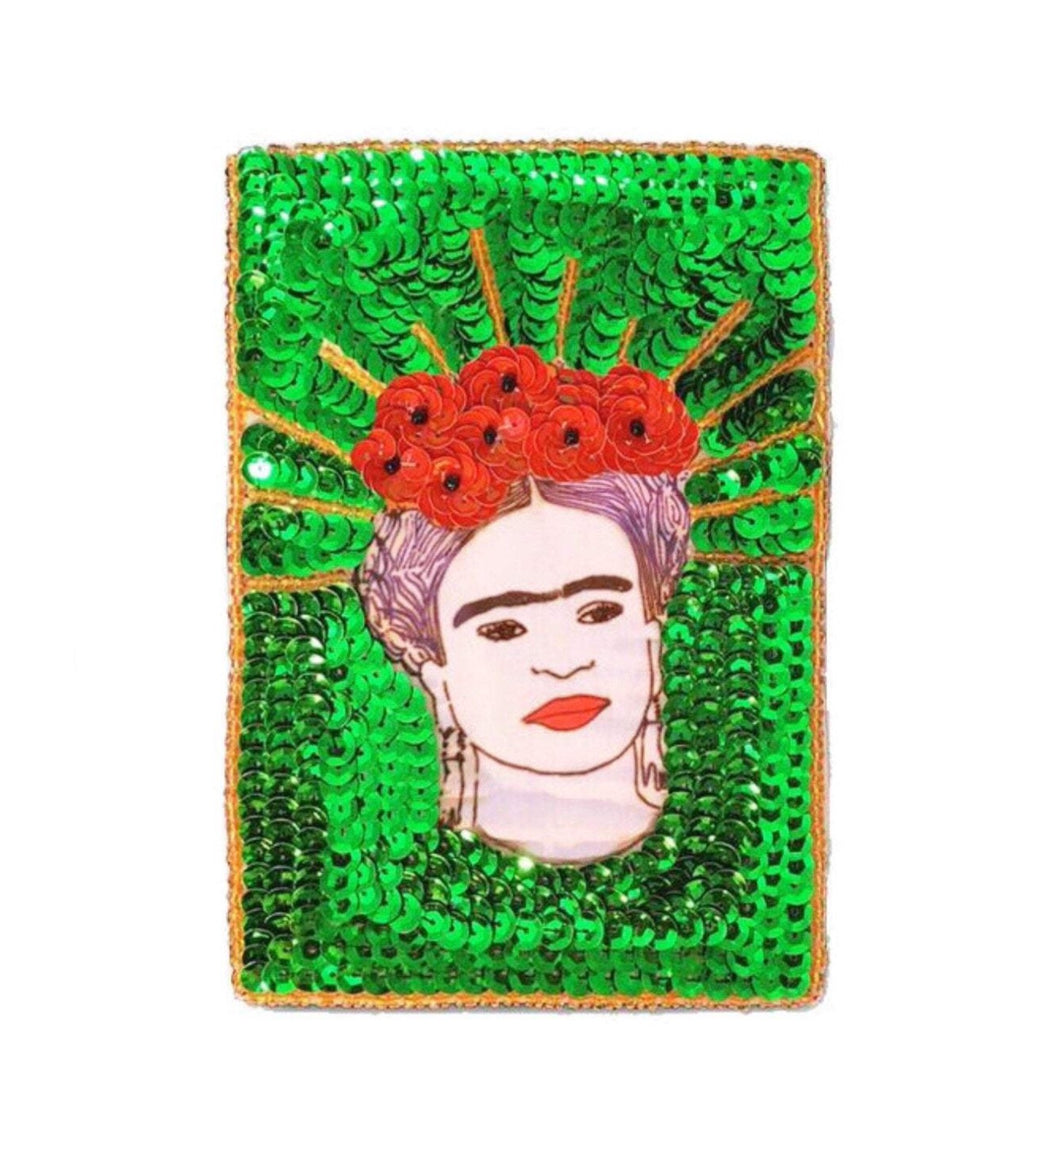 Sewing patch Frida radiant green 15cm - Mexican Art Handmade